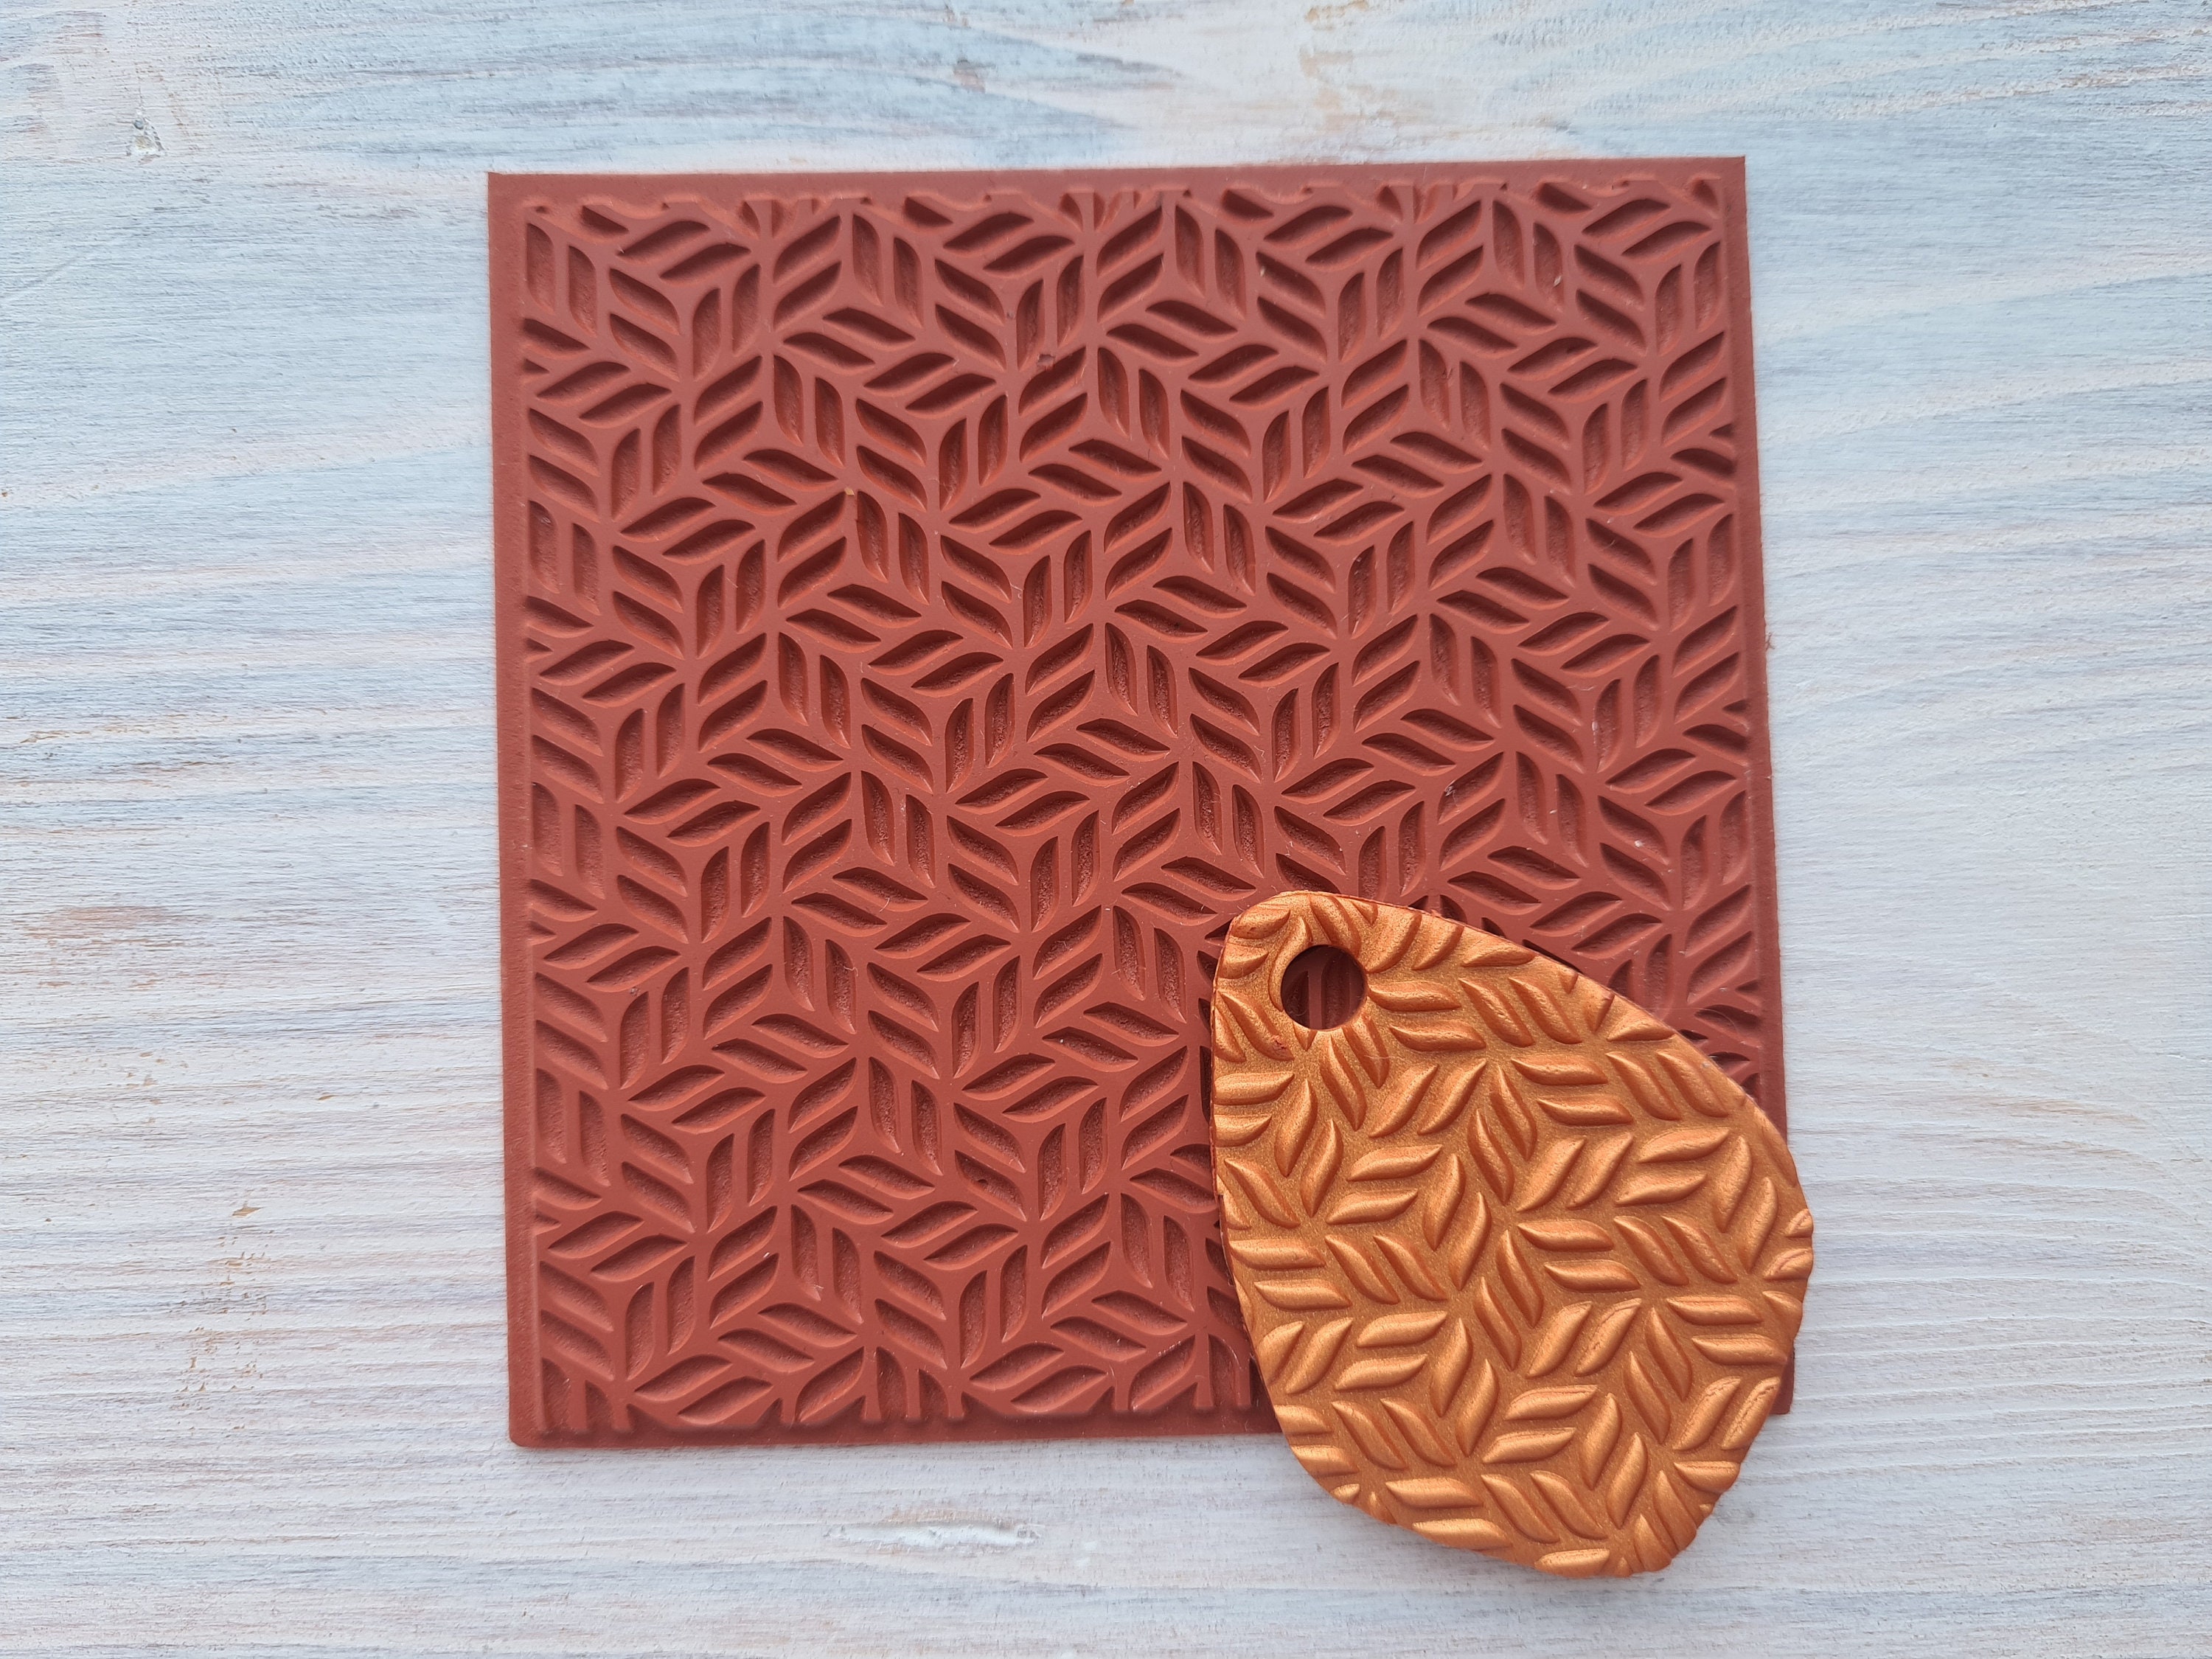 laser engraved silicone texture sheets - molds for clay : r/lasercutting